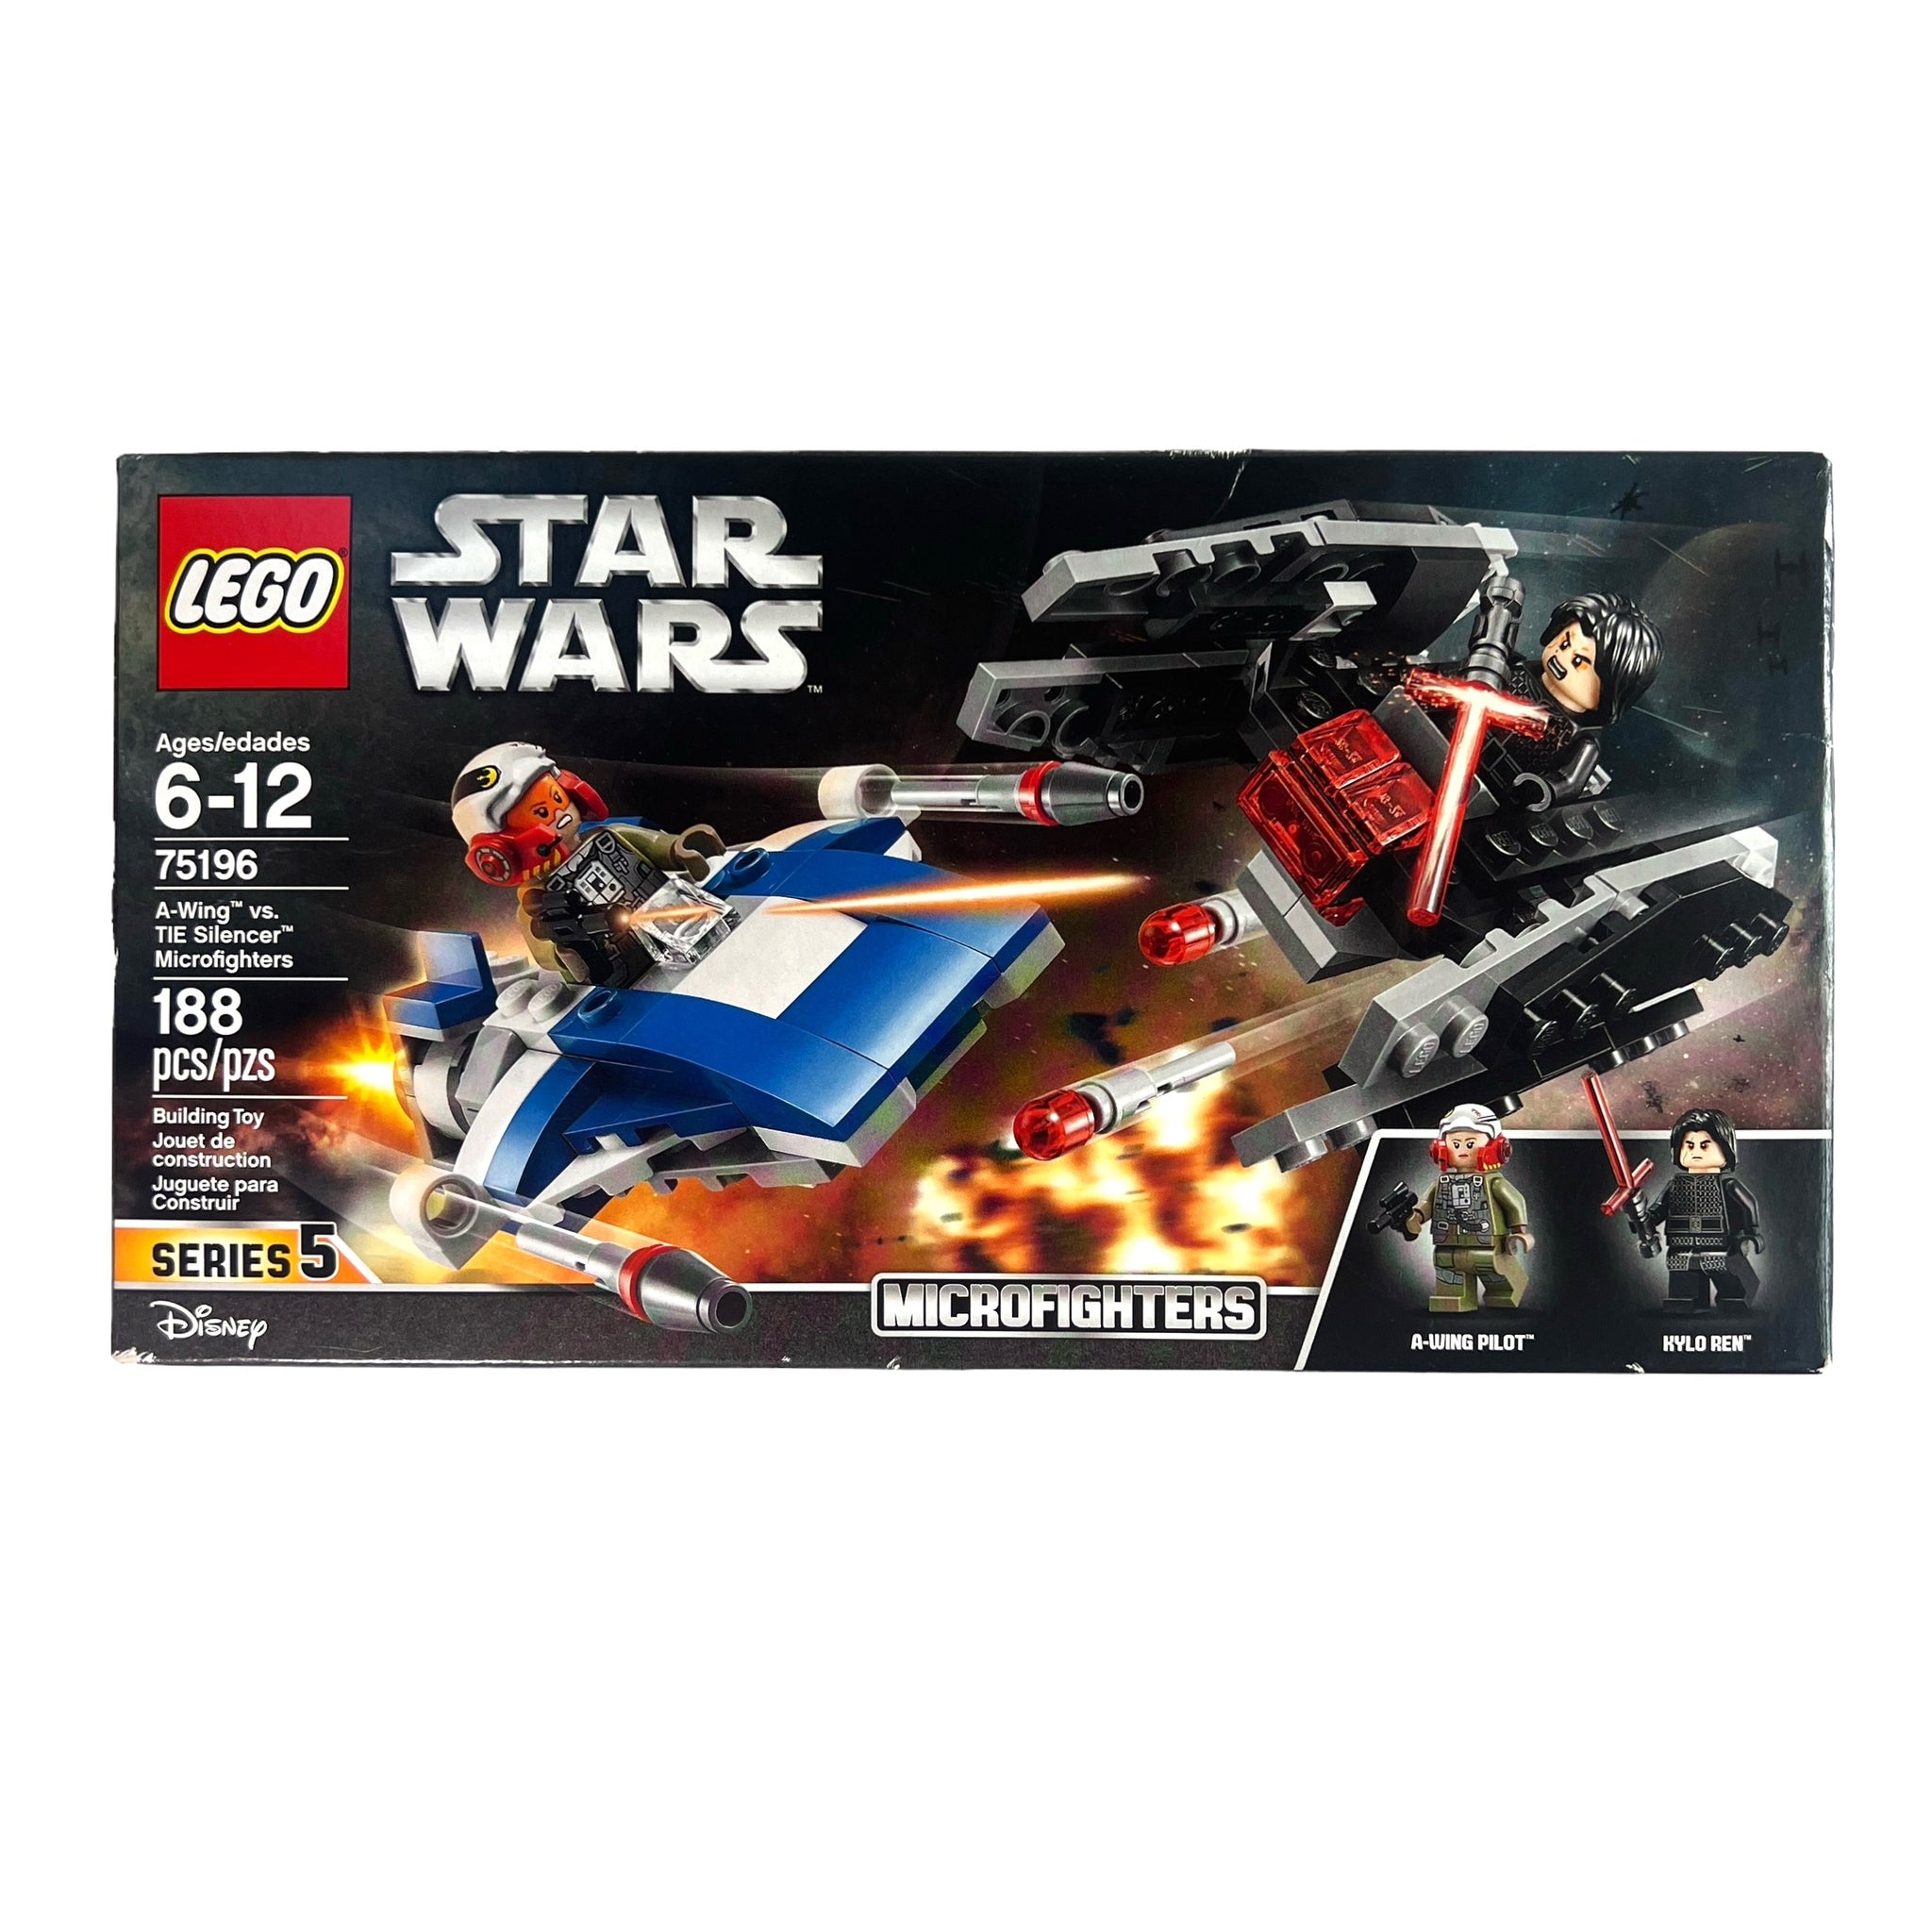 Lego Star Wars A-Wing vs Tie Silencer Microfighters #75196